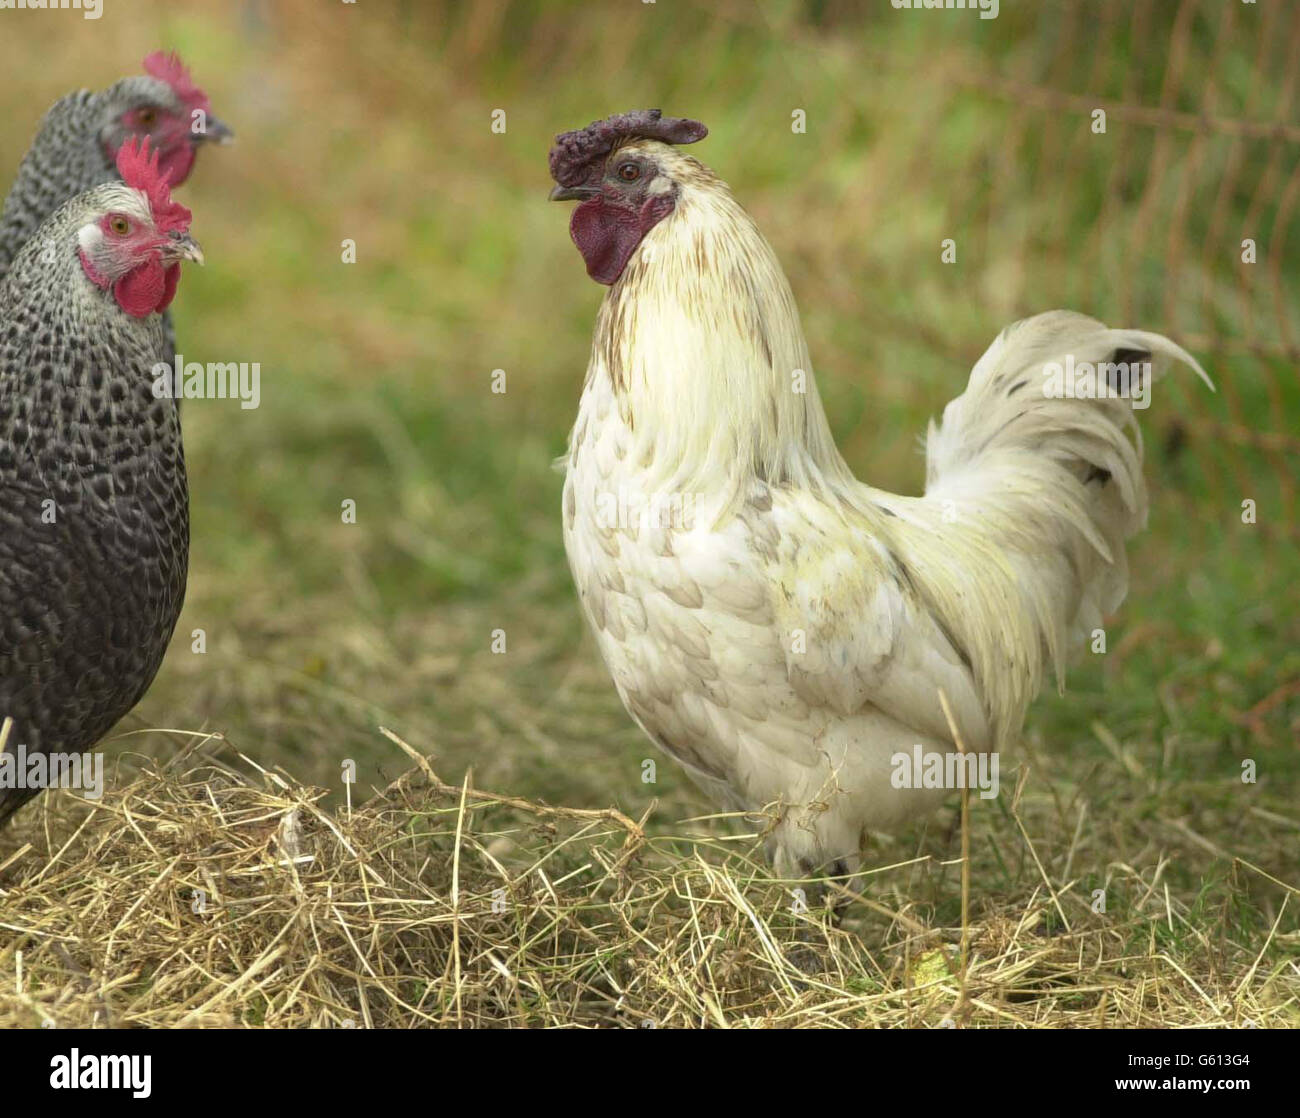 Rocky the rooster Stock Photo - Alamy